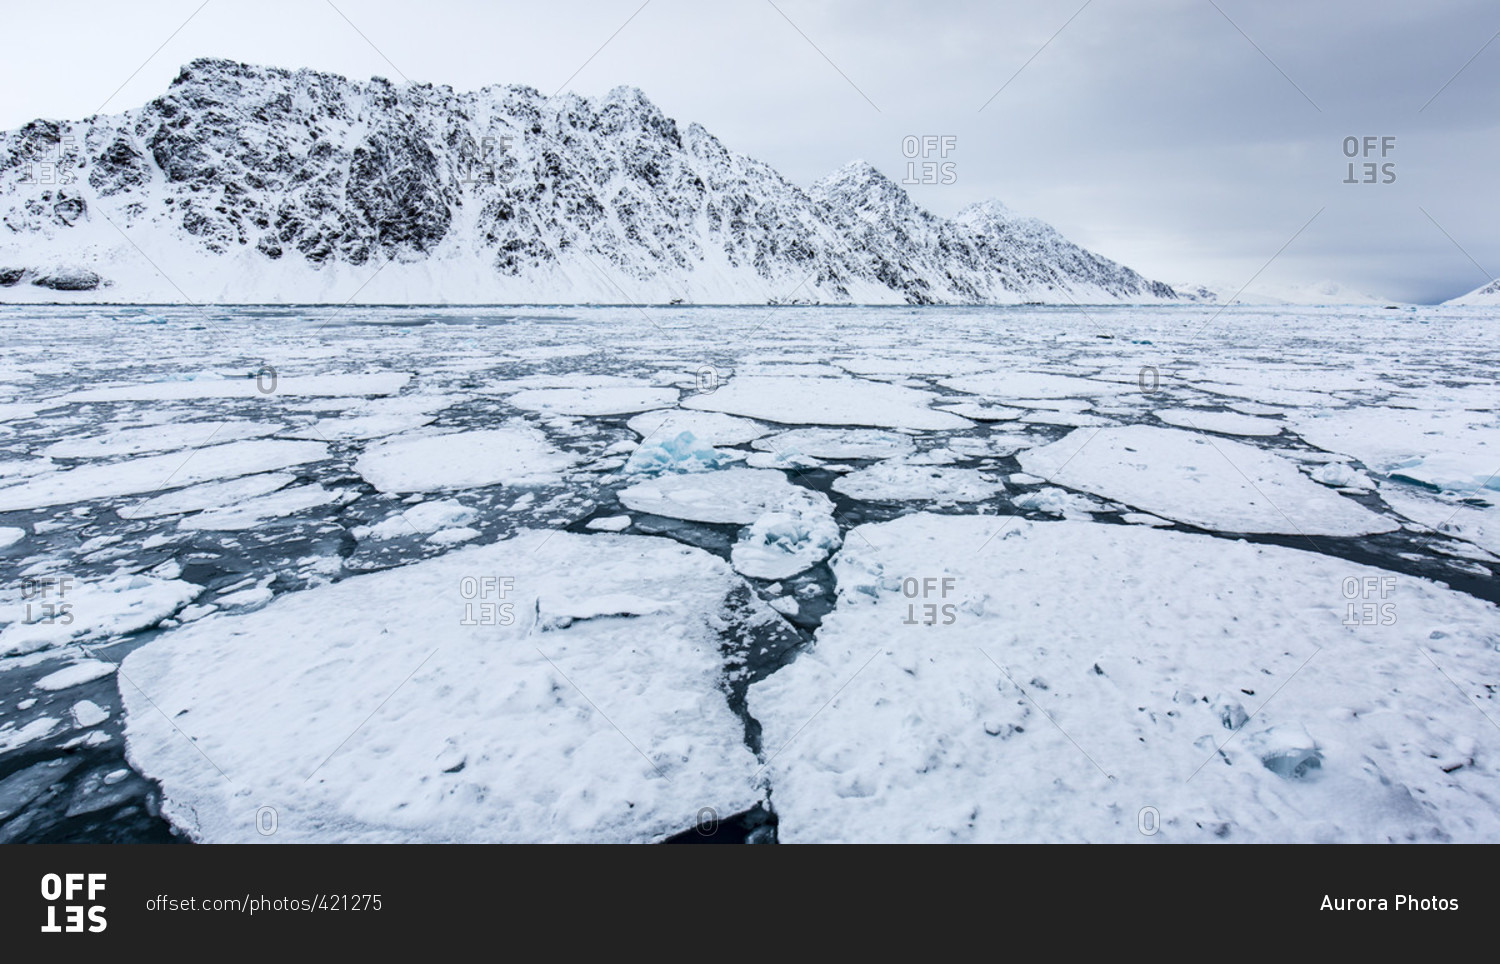 Fragmented Pack Ice On Deep Blue Arctic Sea With Rocky And Slightly Snowy Mountains In The Background